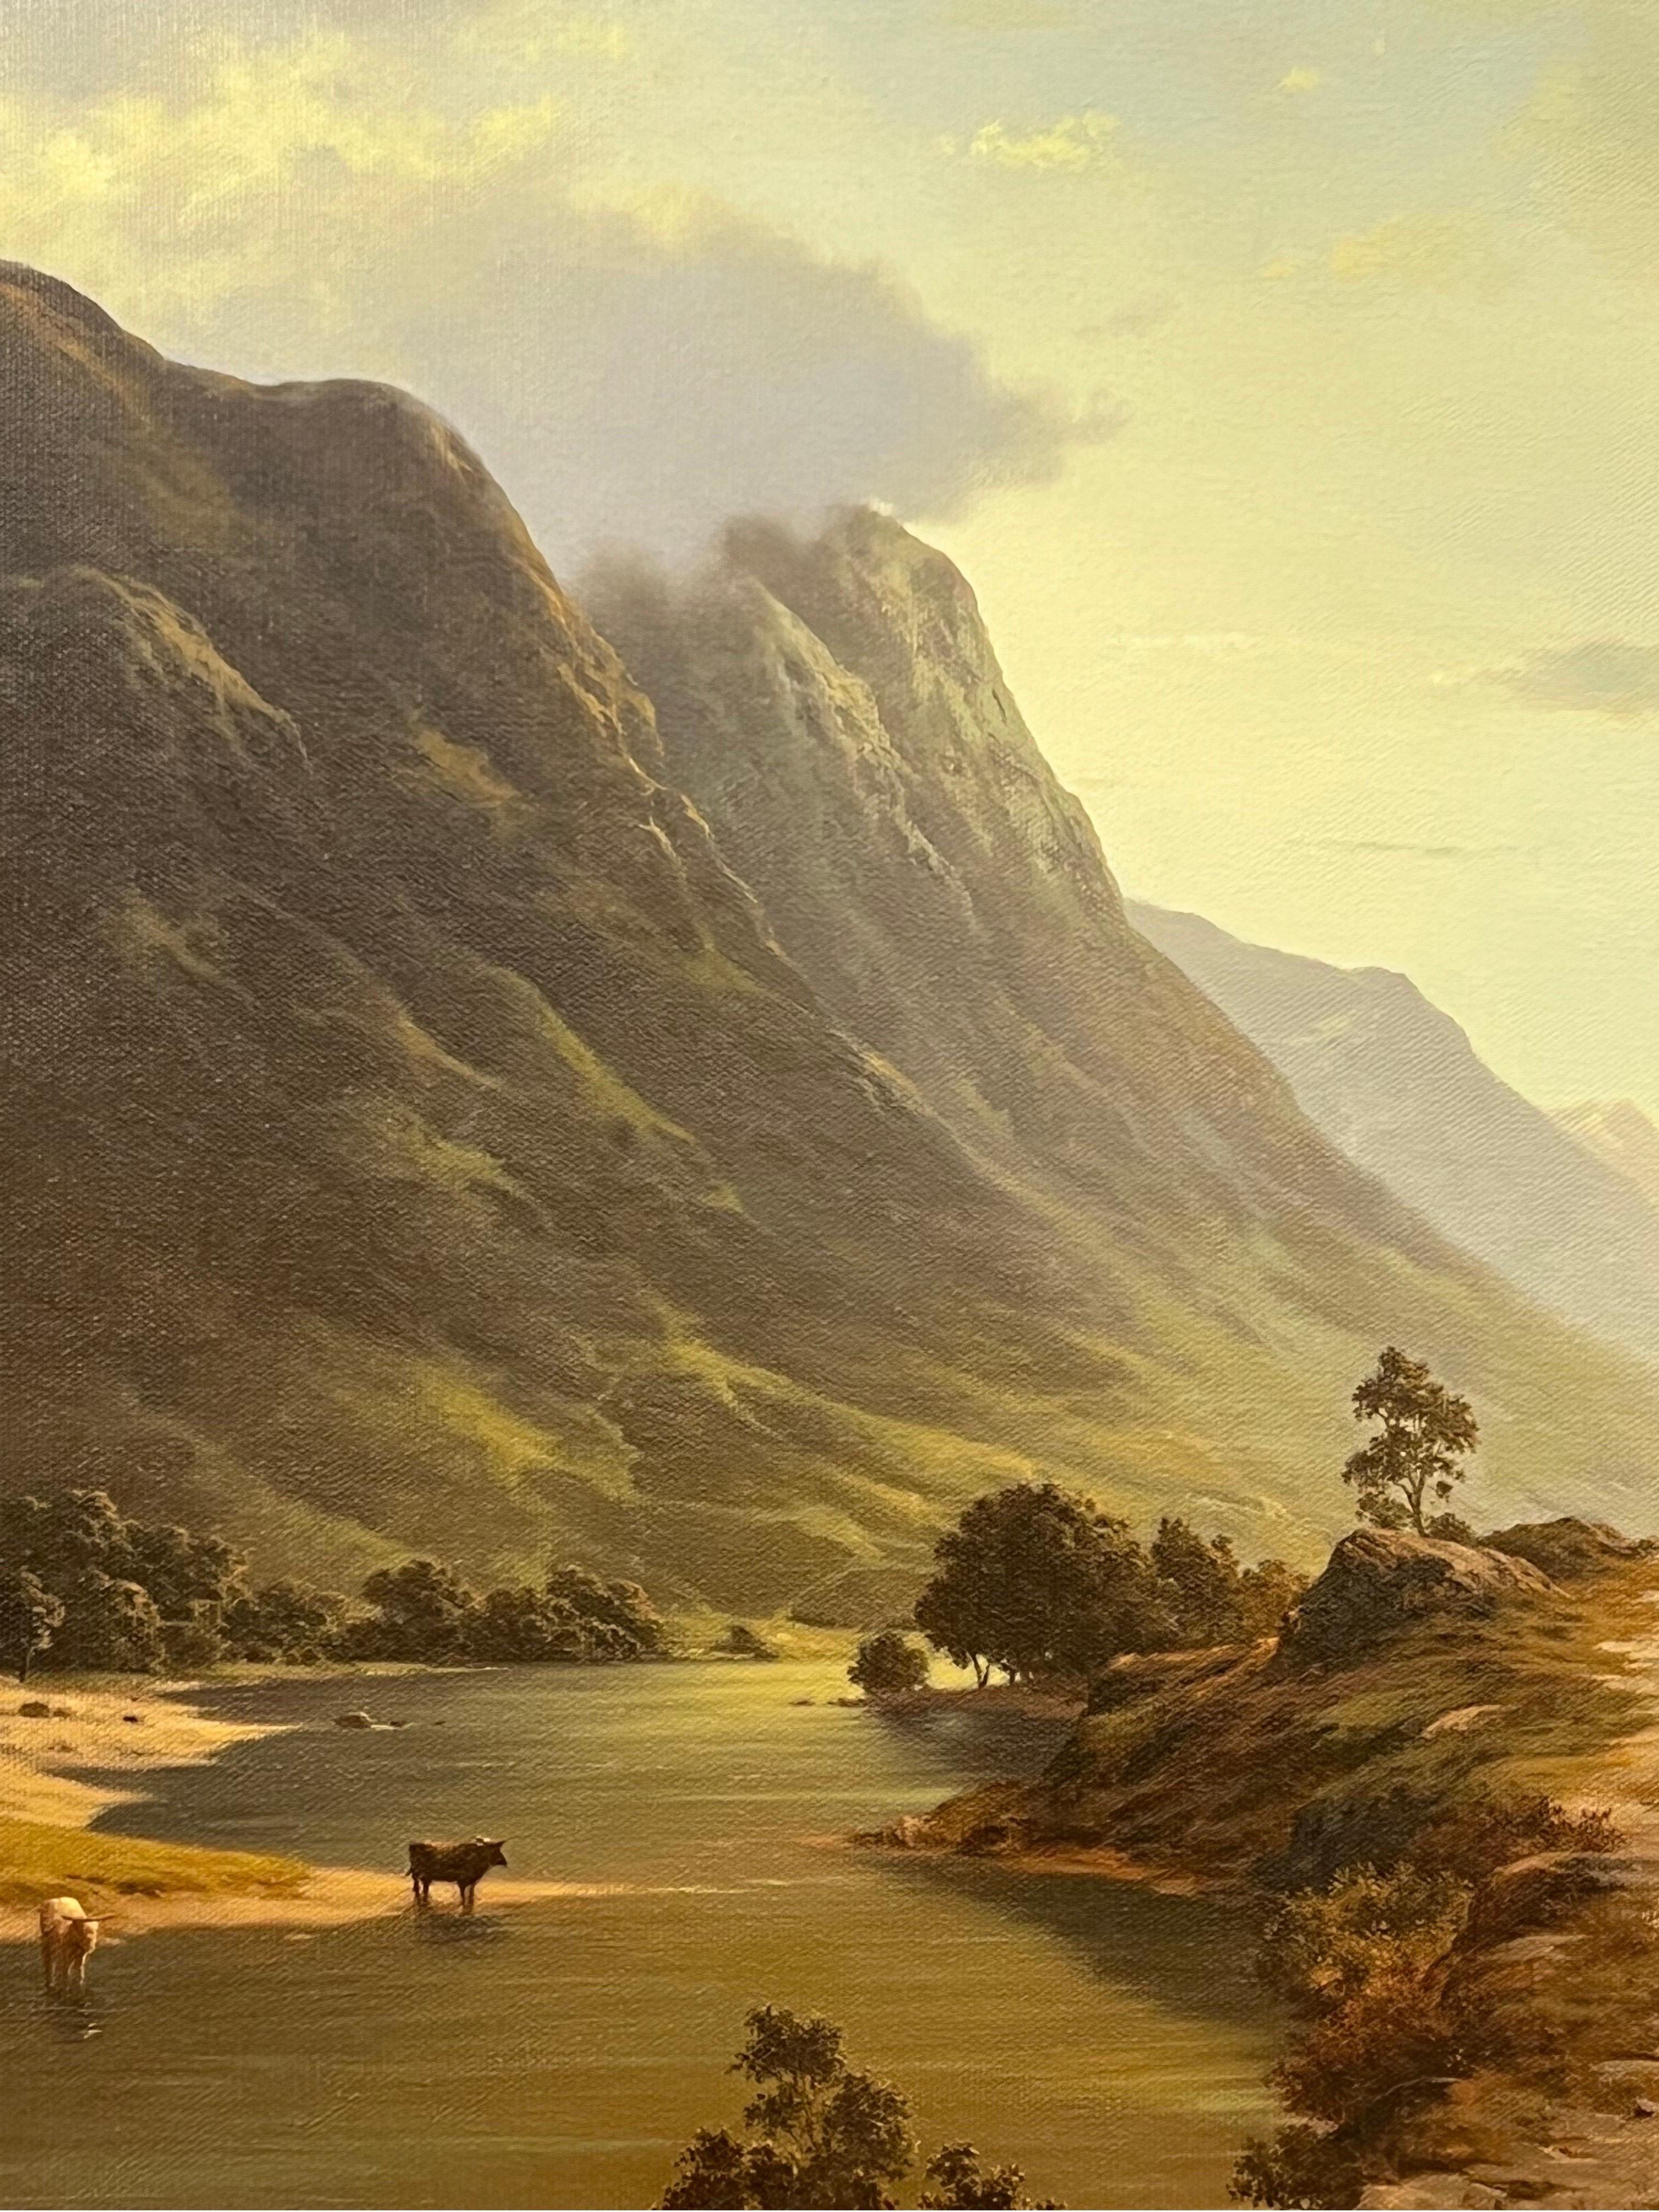 Cattle drinking water from a Loch in the Mountains of the Scottish Highlands - Realist Painting by Howard Shingler